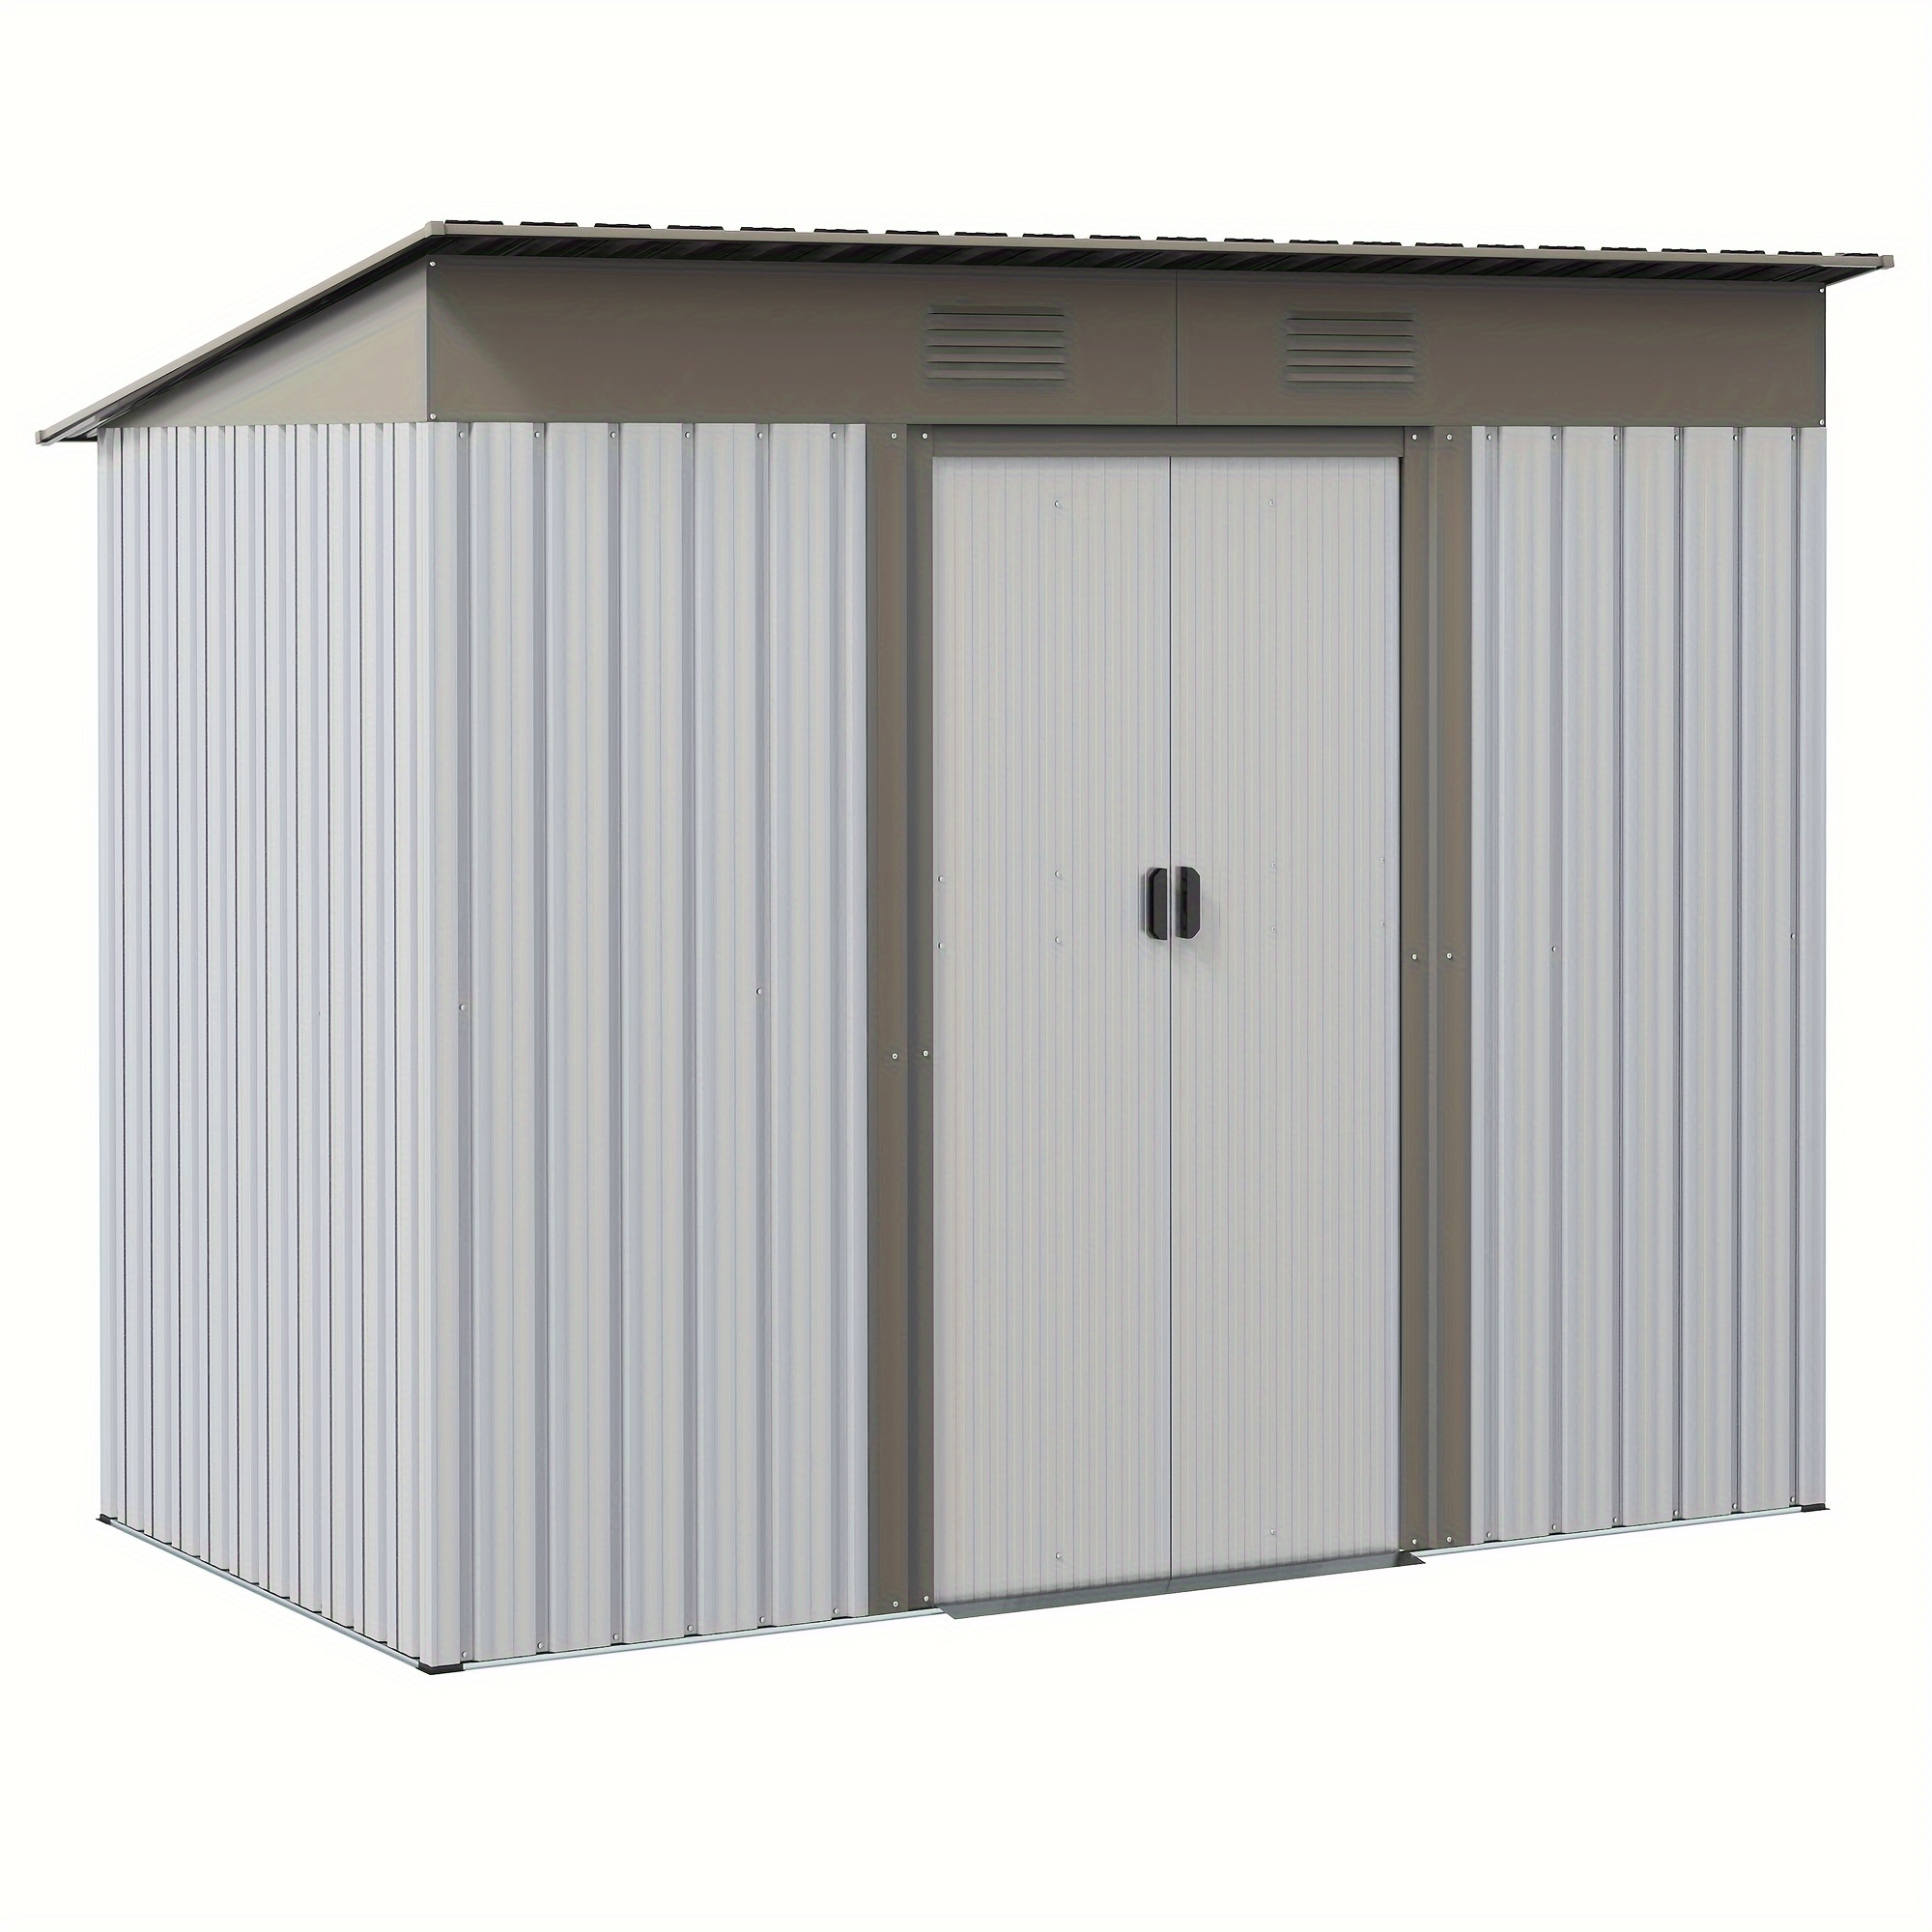 

Outsunny 7' X 4' Metal Lean To Garden Shed, Outdoor Storage Shed, Garden With Double Sliding Doors, 2 Air Vents For Backyard, Patio, Lawn, Silver